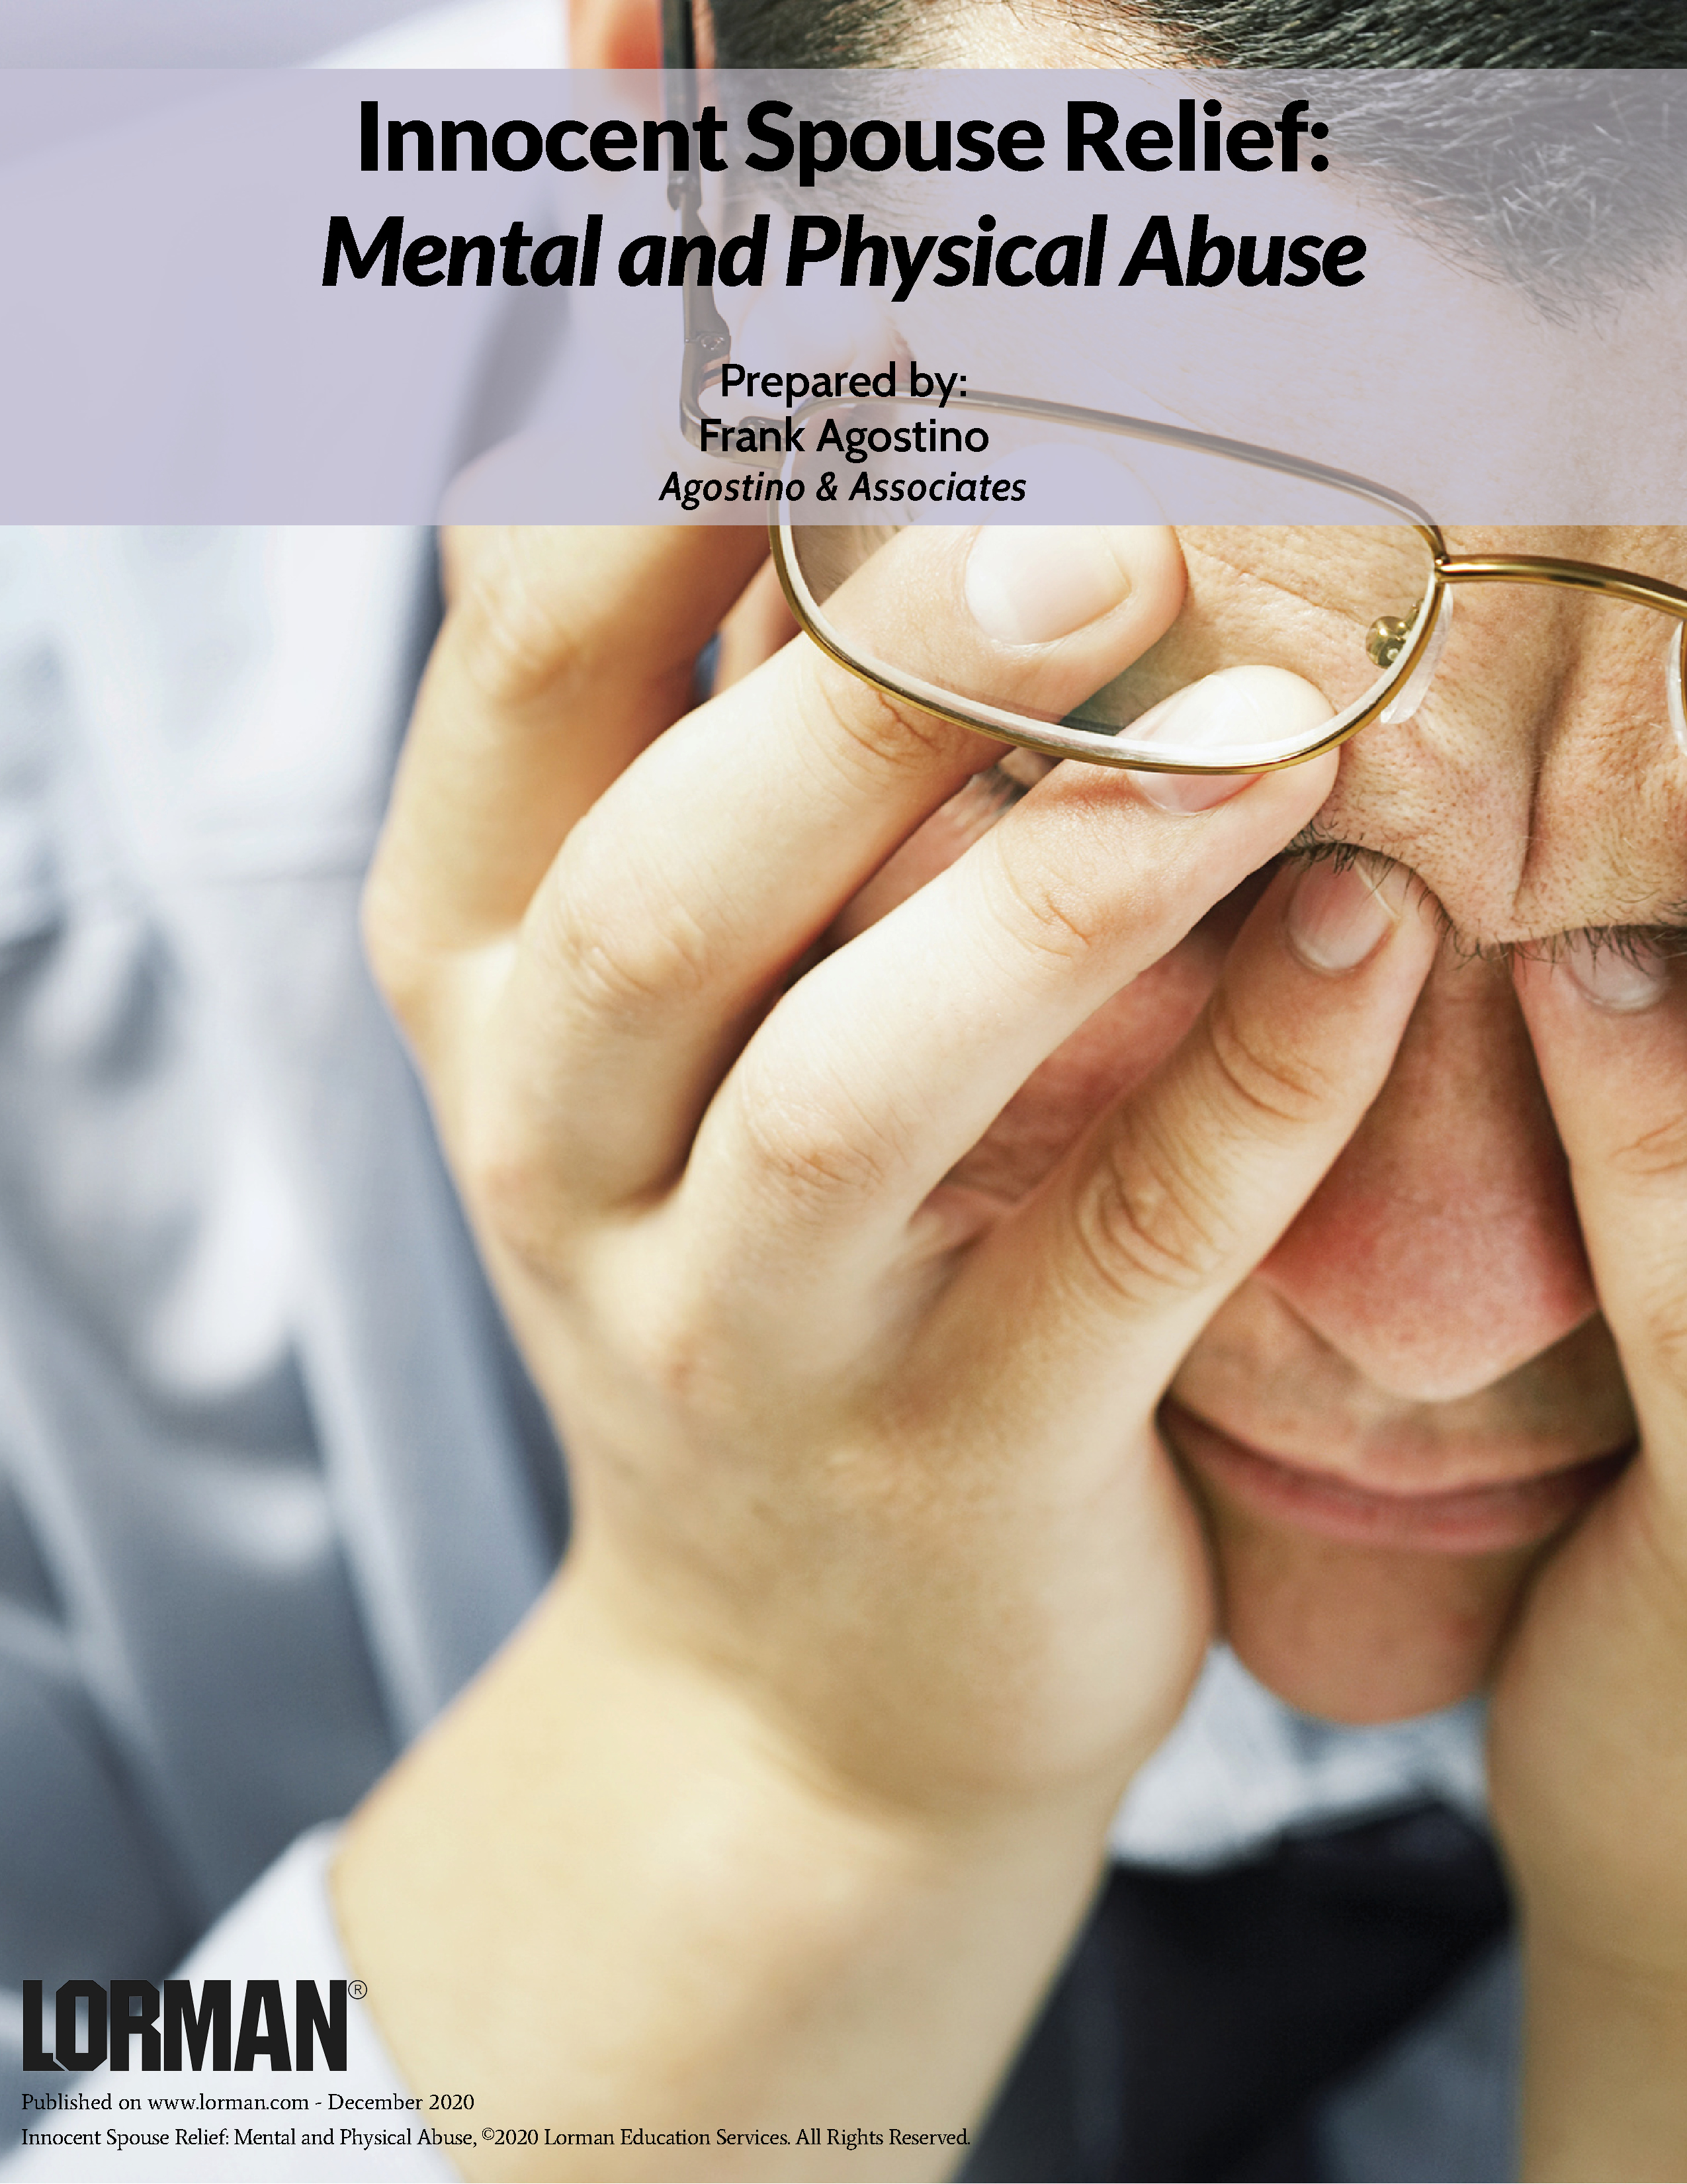 Innocent Spouse Relief: Mental and Physical Abuse